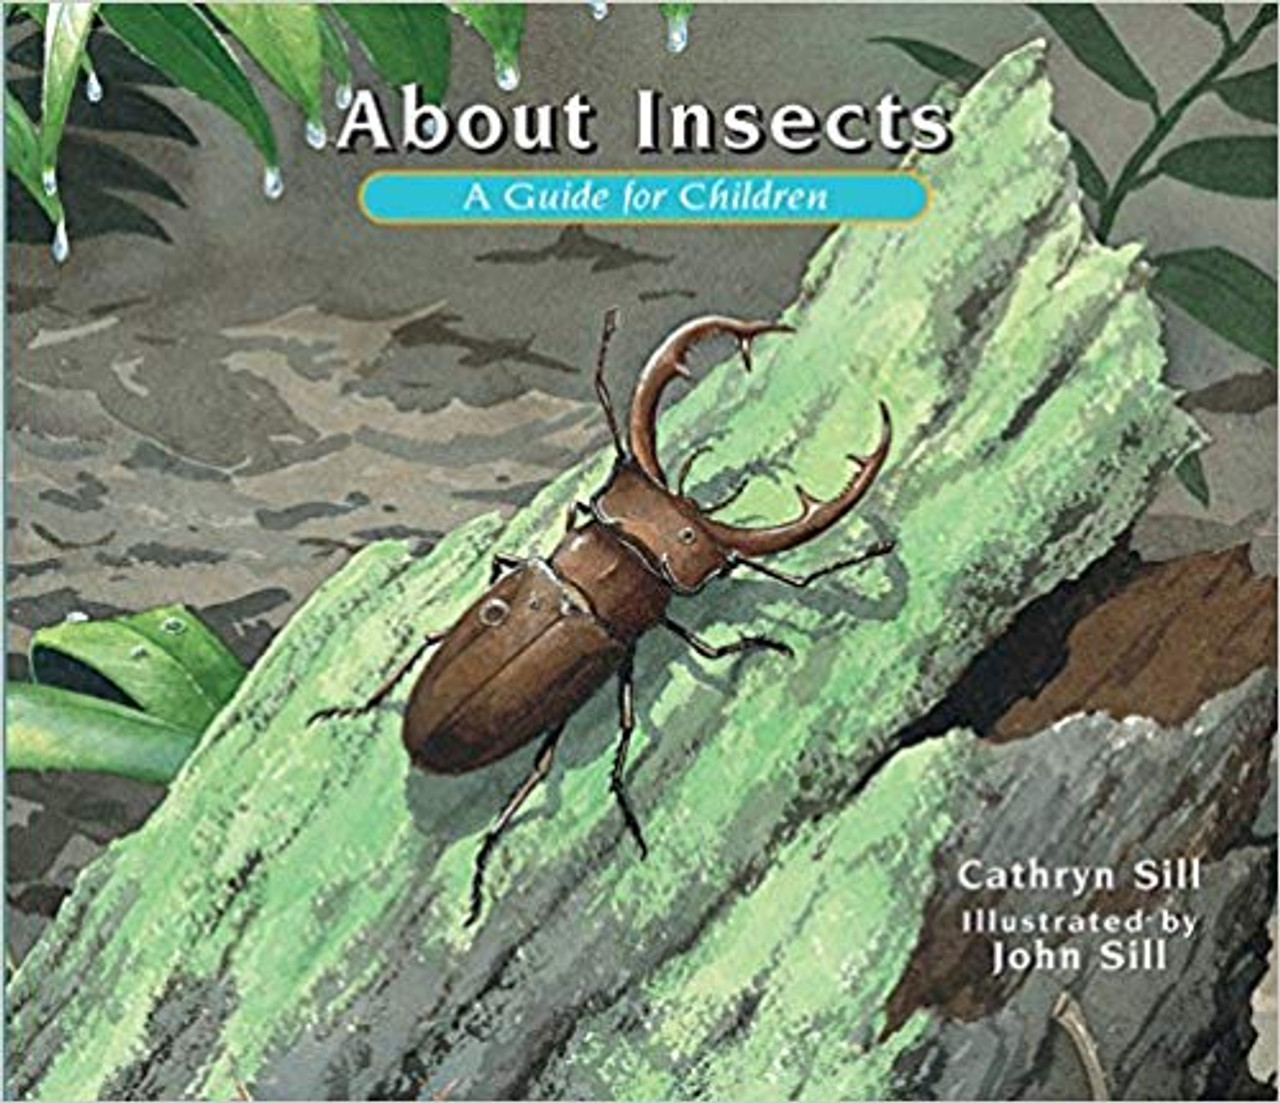 About Insects - revised edition by Cathryn Sill